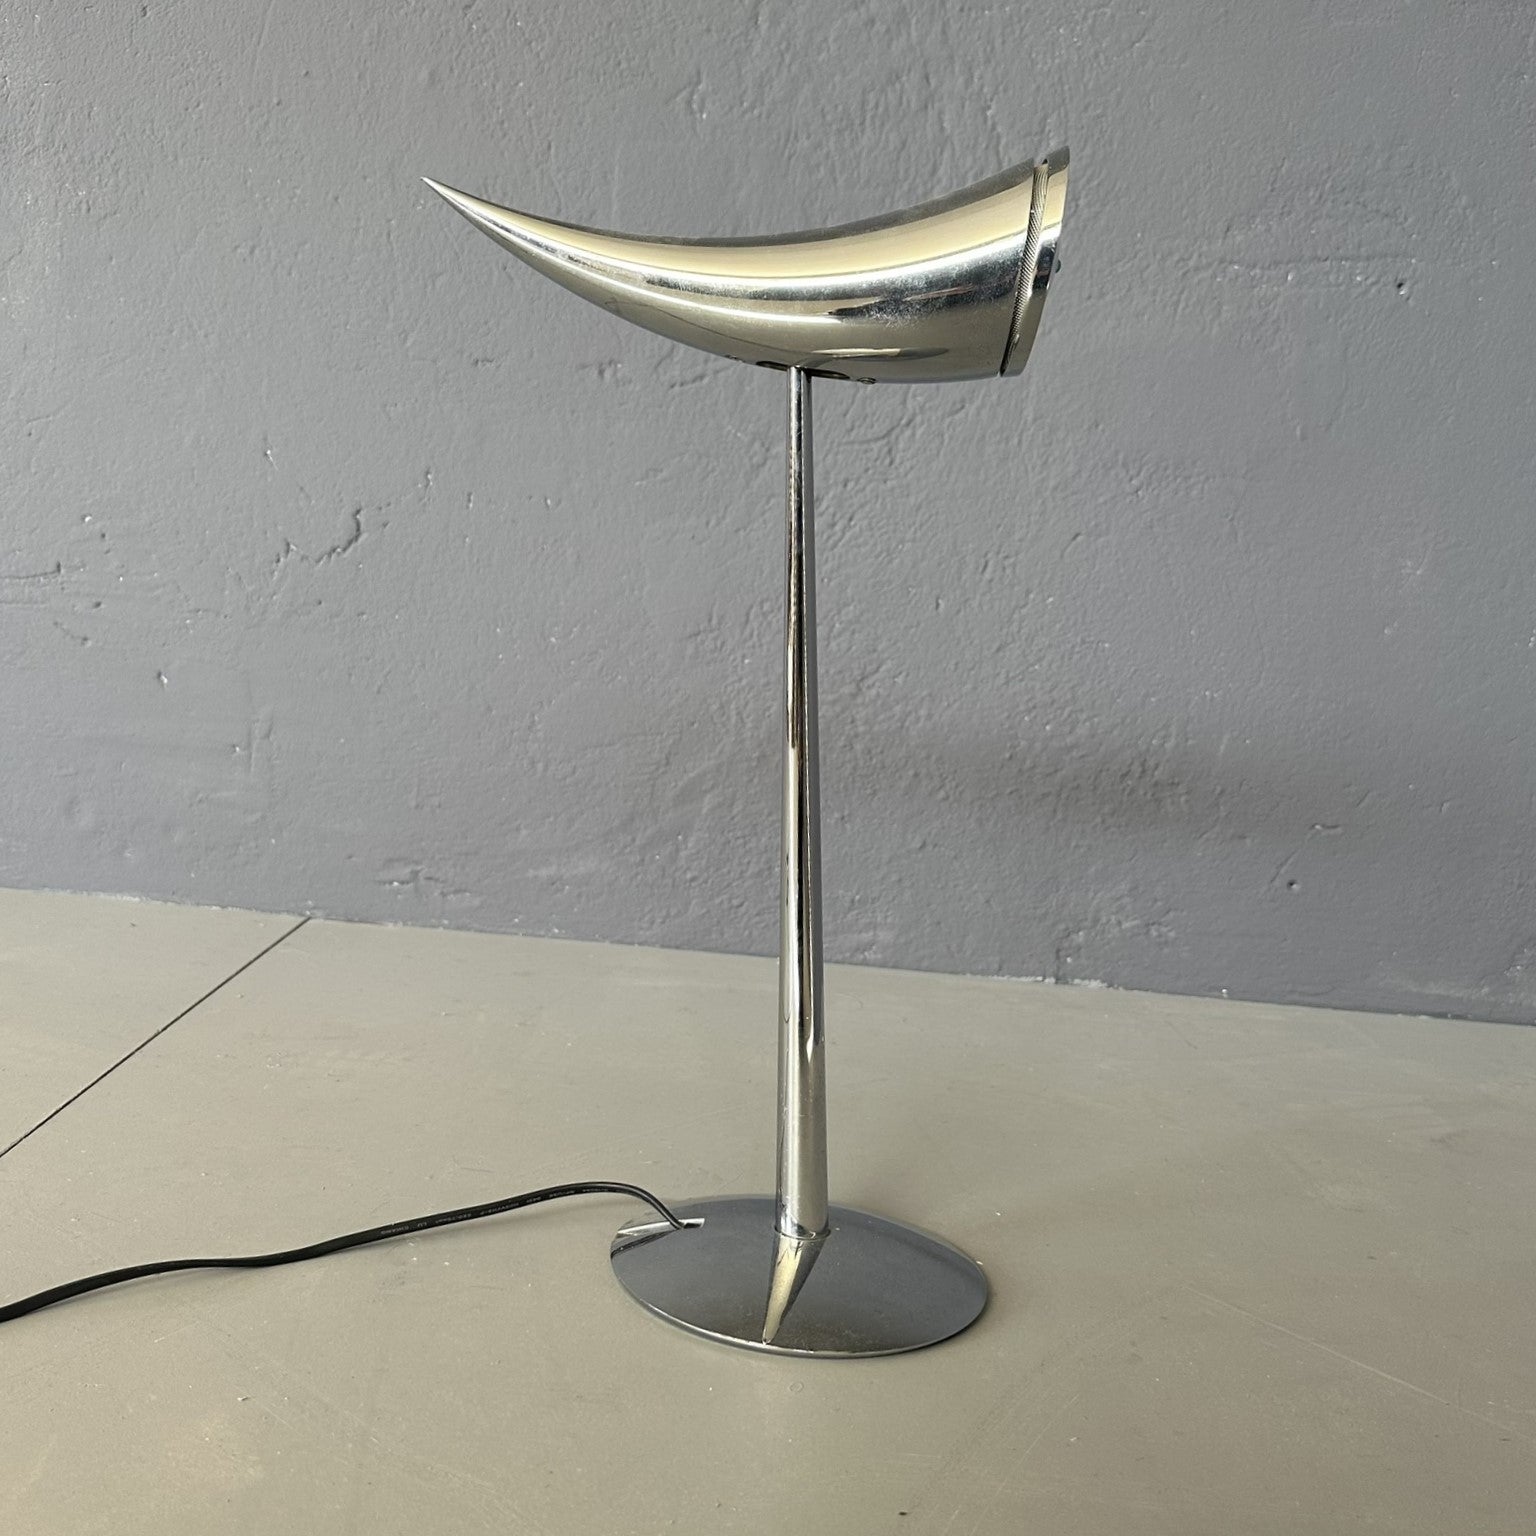 The 'Ara' table lamp, designed by Philippe Starck and made by Flos, takes its name from the designer's daughter.
It is a table lamp with direct adjustable light, with bold lines.
The chromed steel structure, with pressed glass front screen.
The On